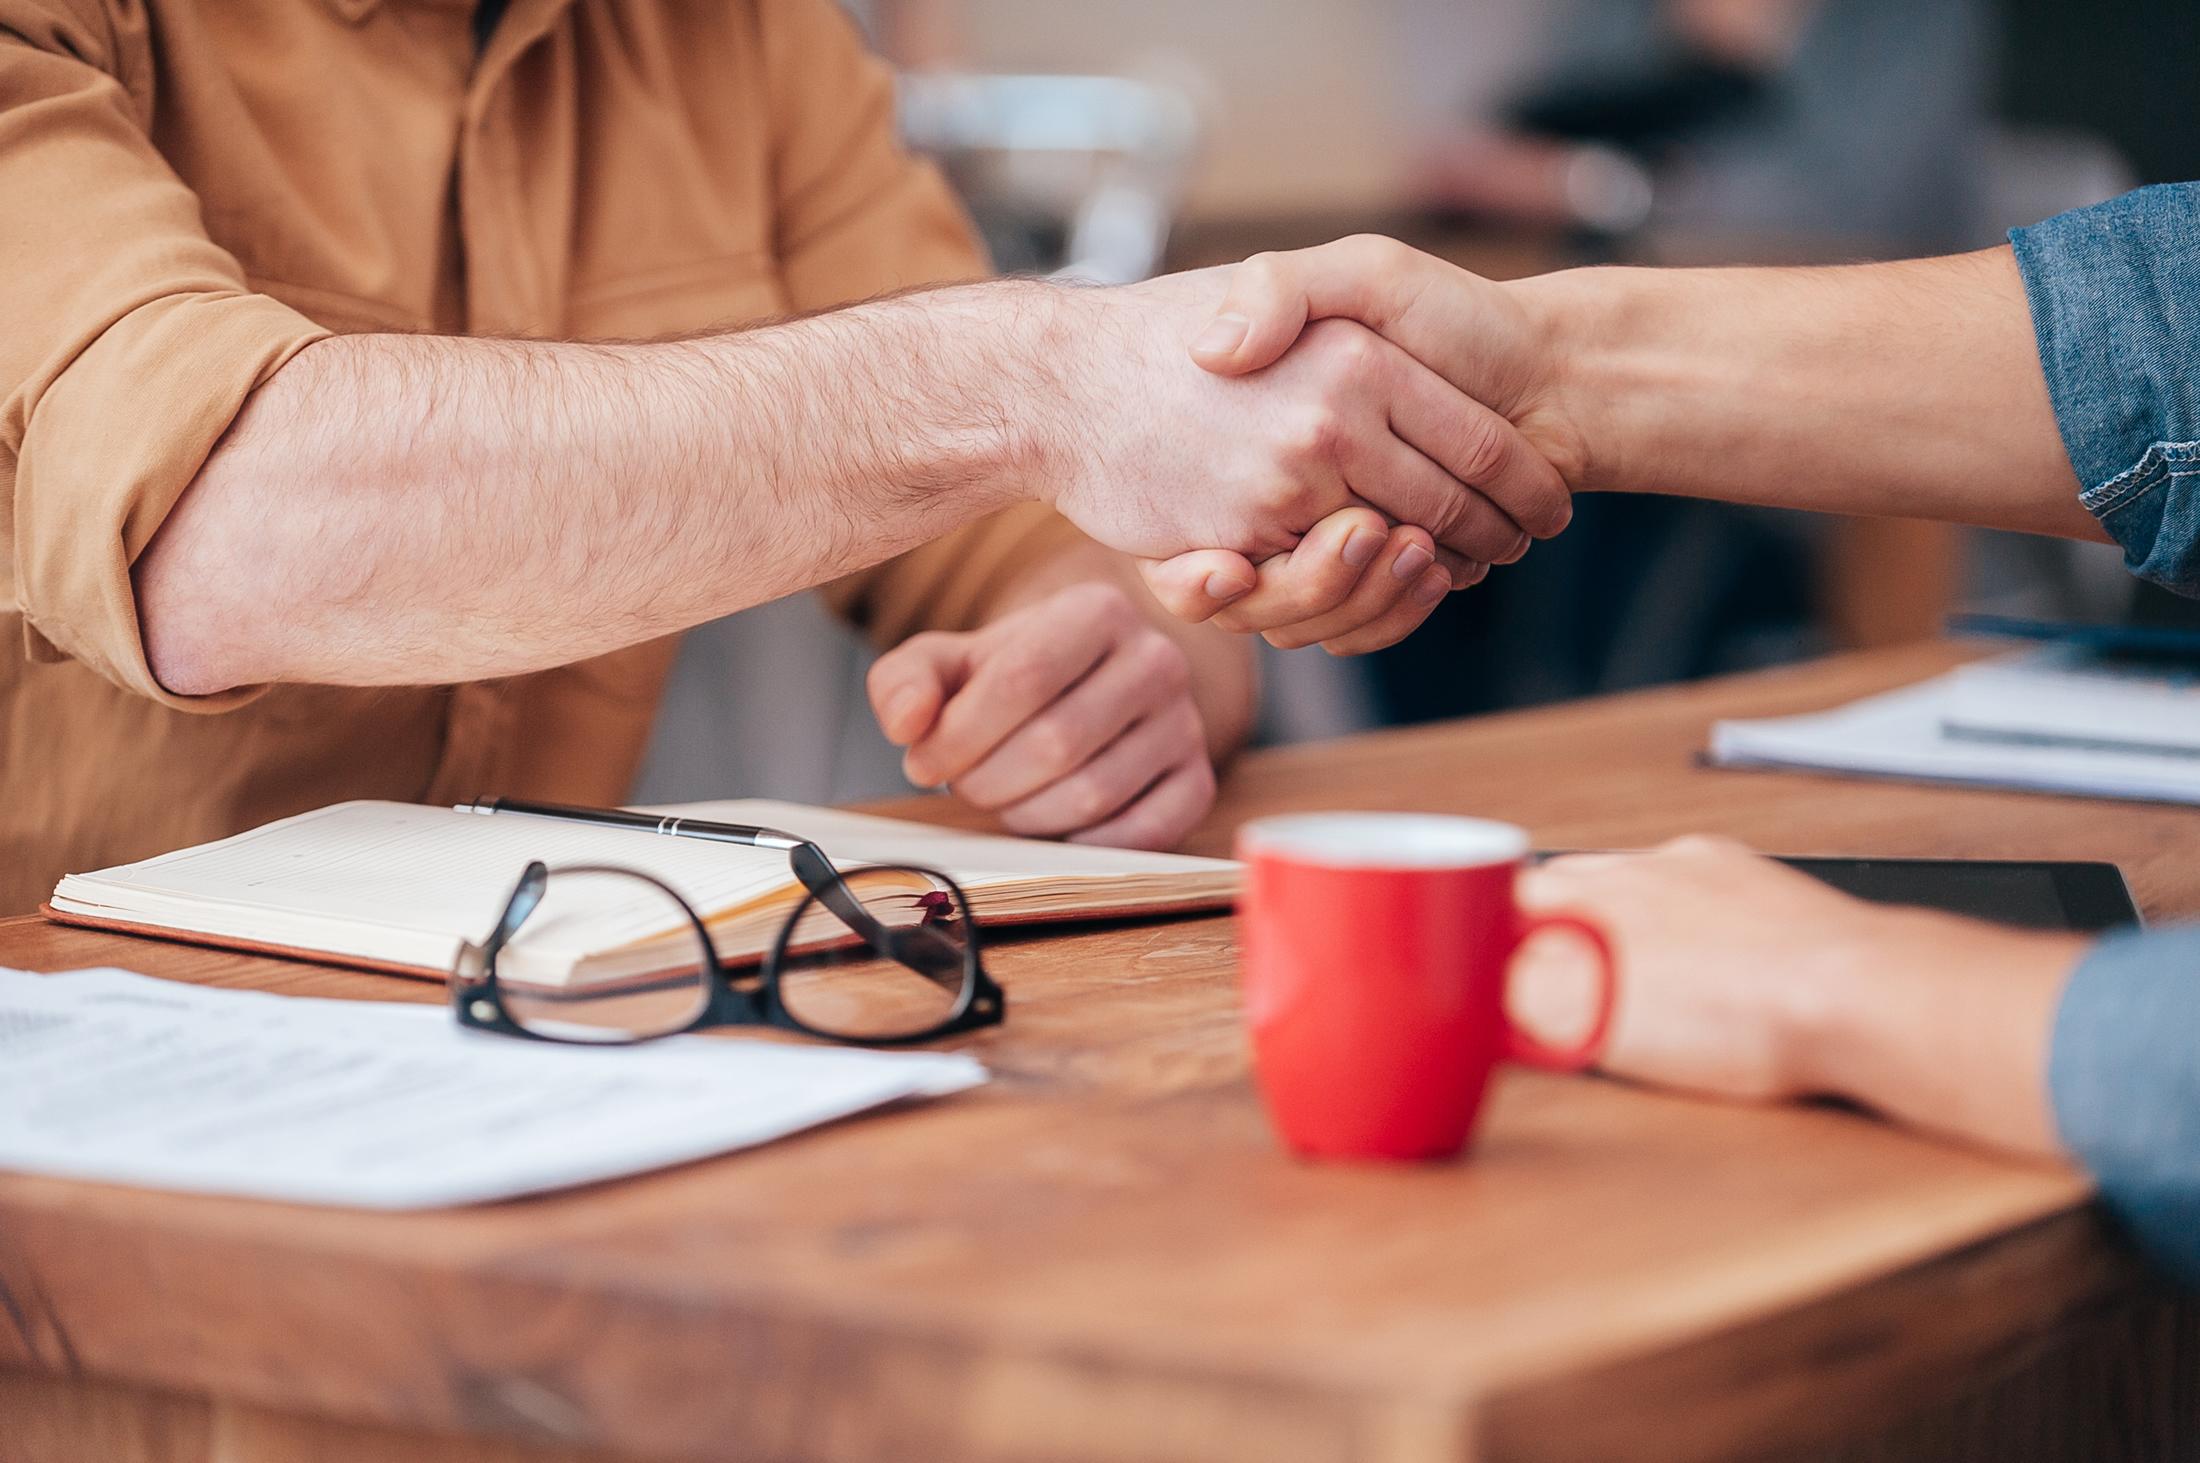 Two colleagues shaking hands over coffee at a wooden table